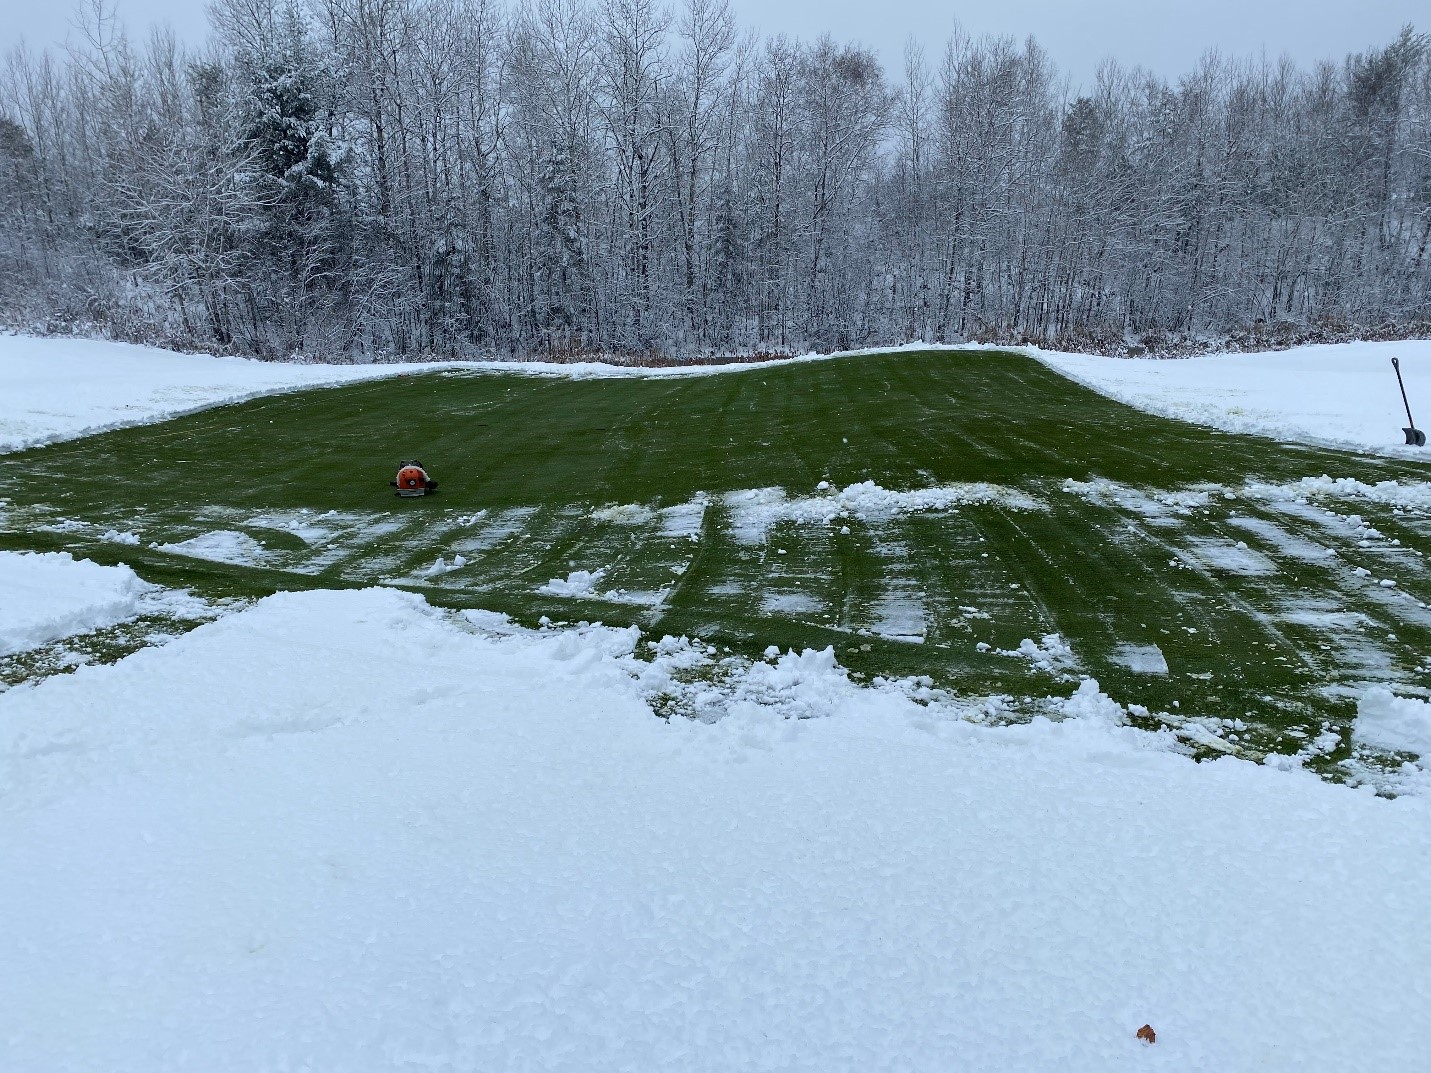 An area of green turf surrounded by snow-covered ground